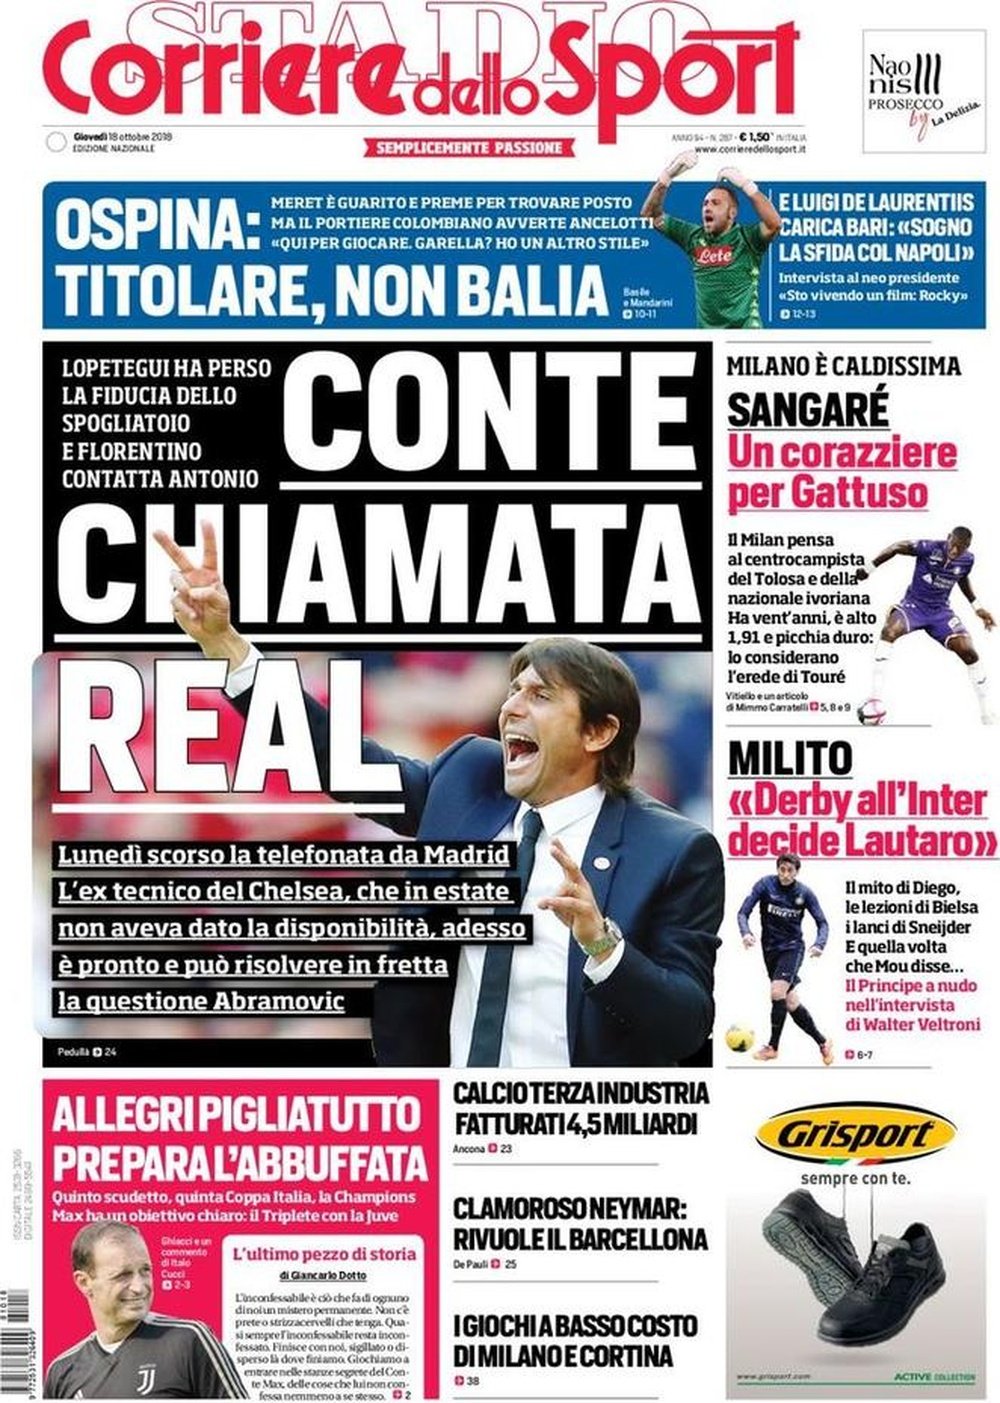 Reports in Italy claim that Conte is high in Real Madrid's thinking. CorriereDelloSport